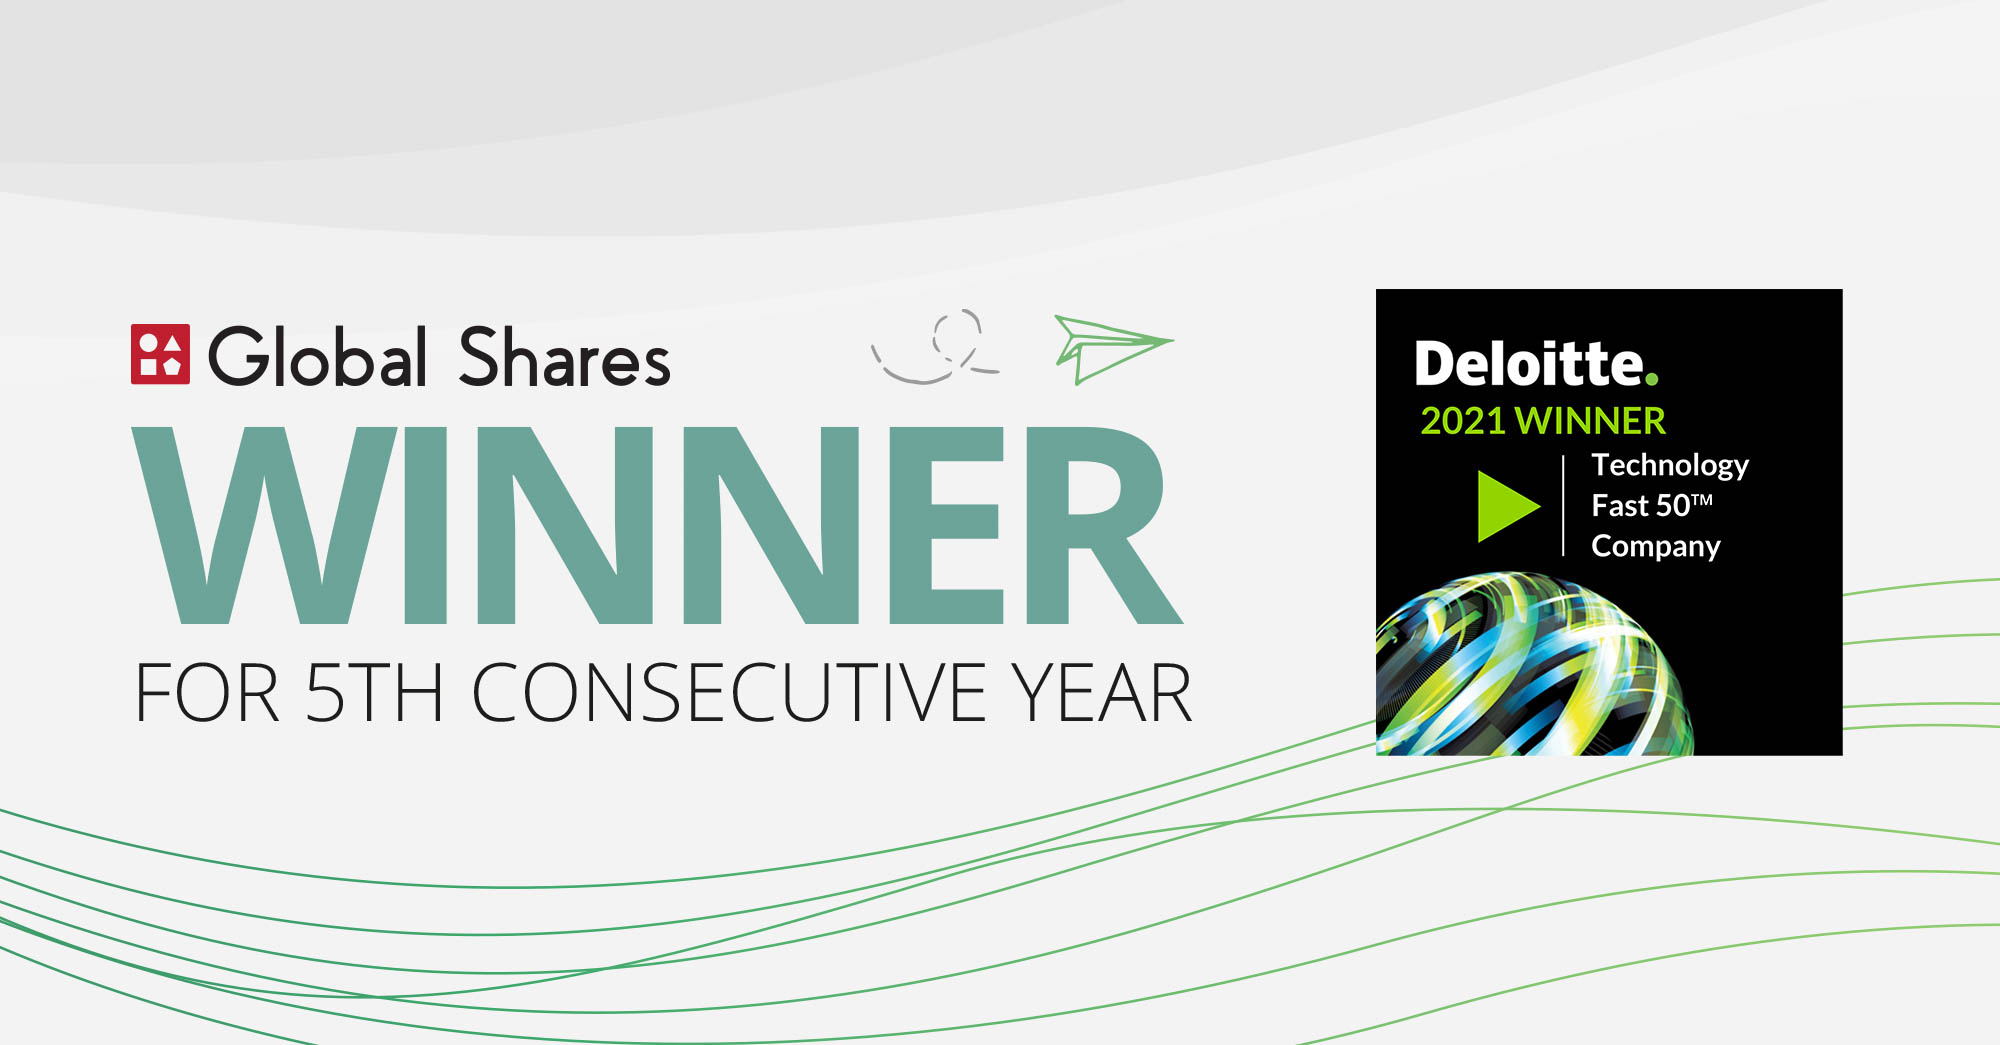 Deloitte Fast50™ winner for 5th consecutive year